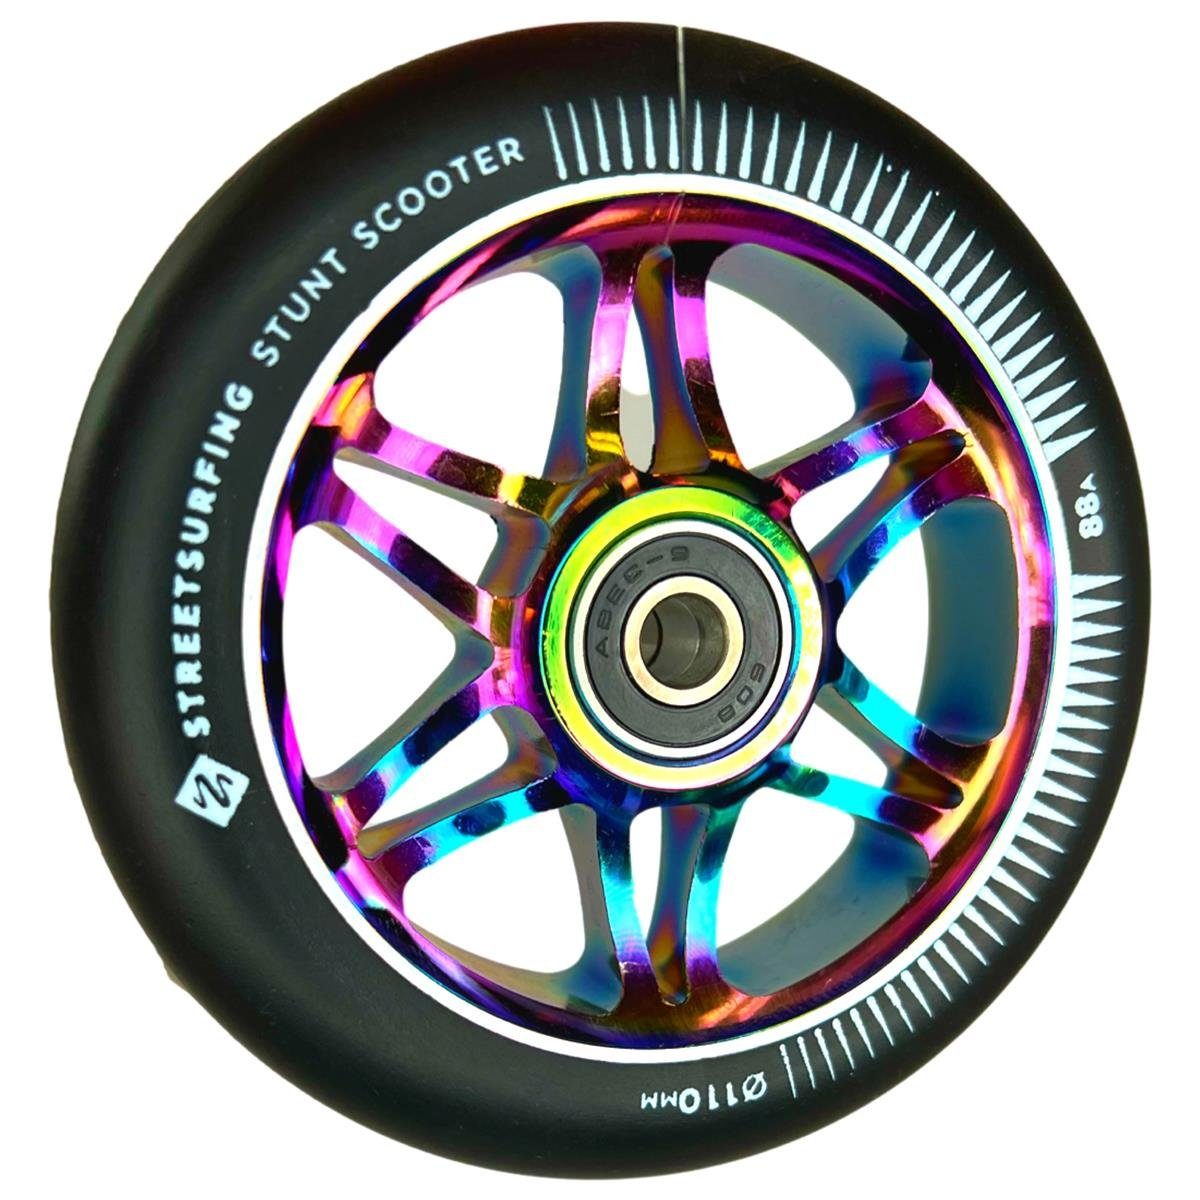 Street Surfing Stuntscooter Street Surfing 10 Spoked Stunt-Scooter Rolle 110mm Neochrom